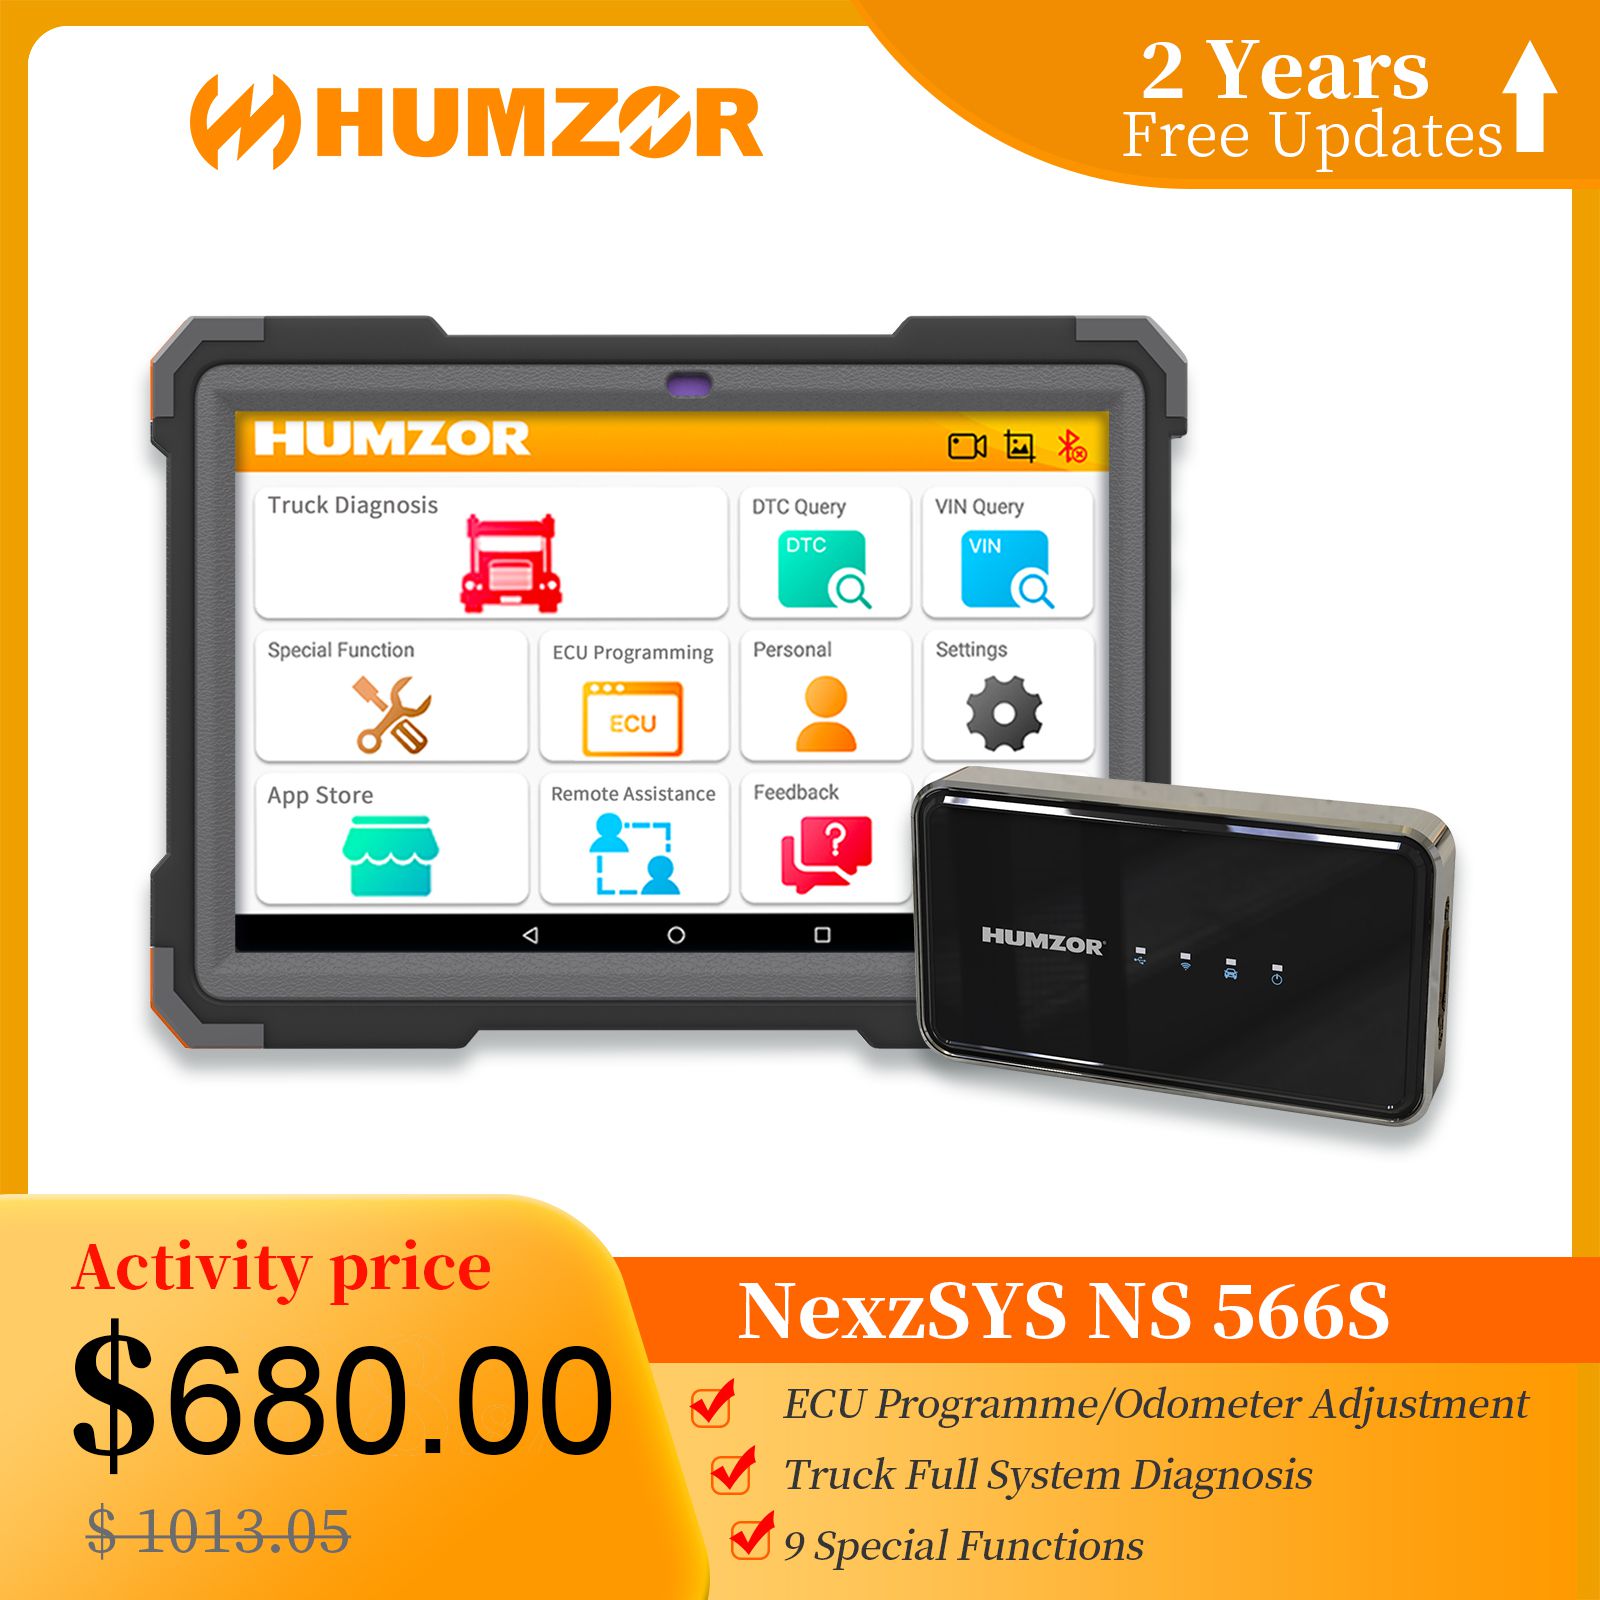 Humzor ns566s Heavy Duty Truck Diesel full System Diagnosis Tool OBD2 Professional scanner 9 Reset ABS / DPF / Mile Adjustment